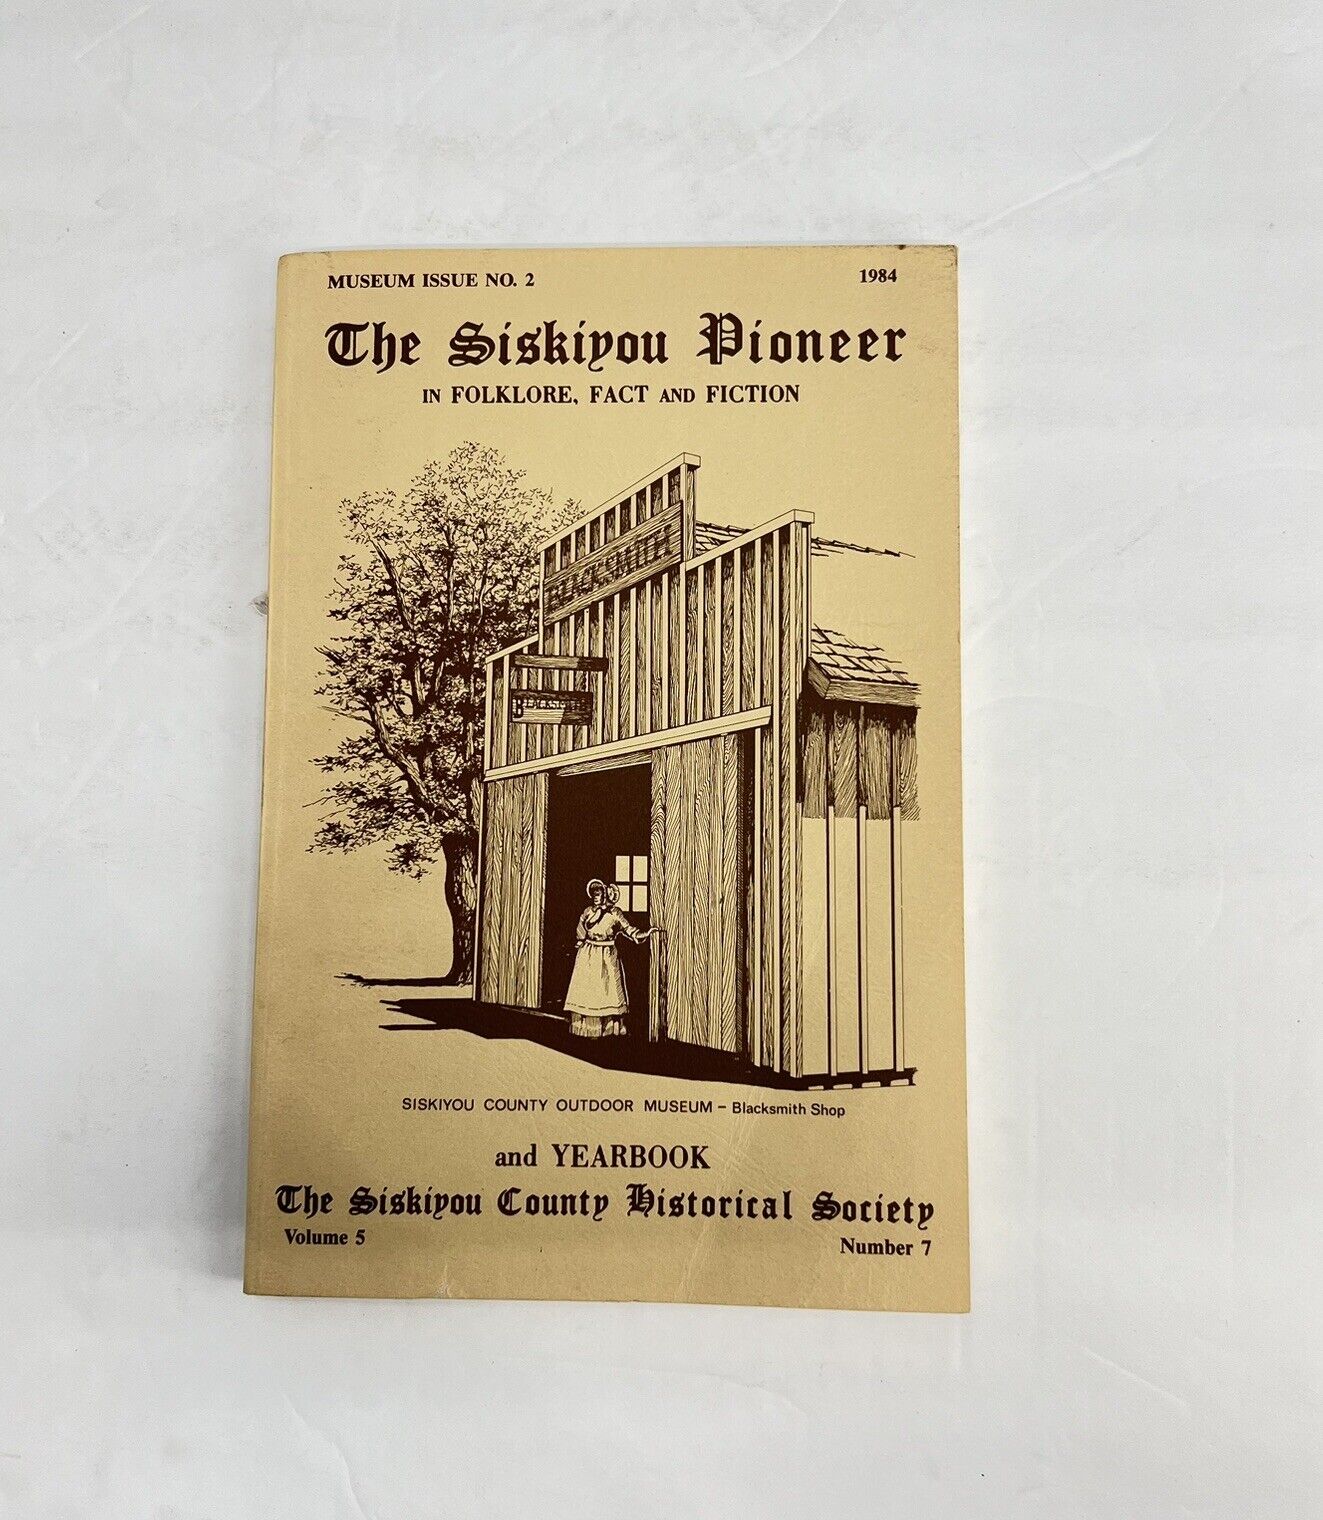 THE SISKIYOU PIONEER Vol 5 No 7 Museum Issue No 2